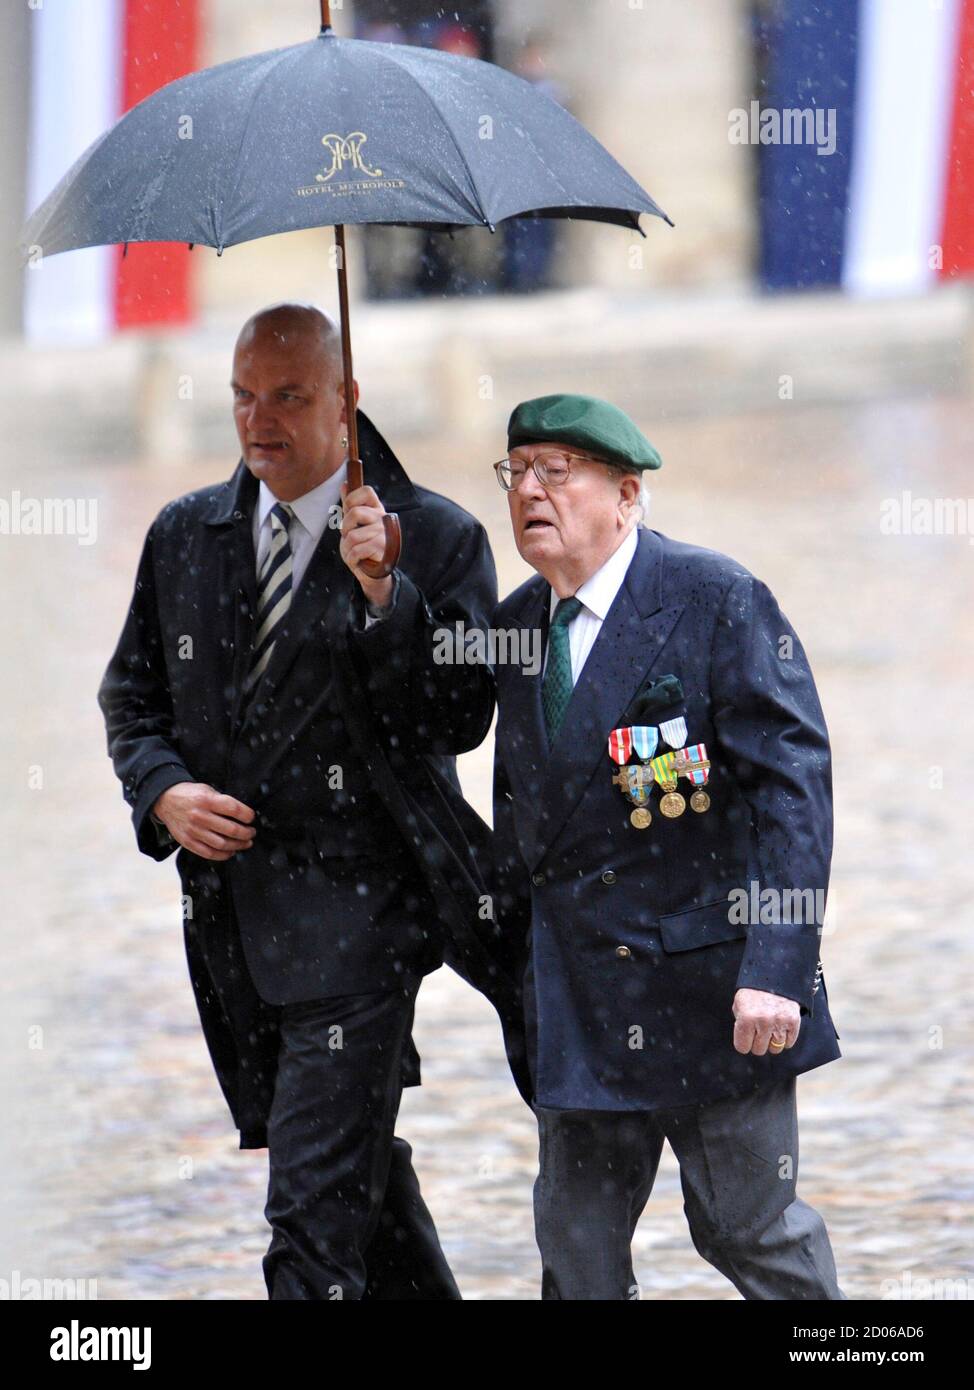 Former French far right Front national party leader Jean-Marie Le Pen (R),  wearing the green beret of Legion etrangere paratroopers, as former  soldier, arrives at the funeral service dedicated to the seven